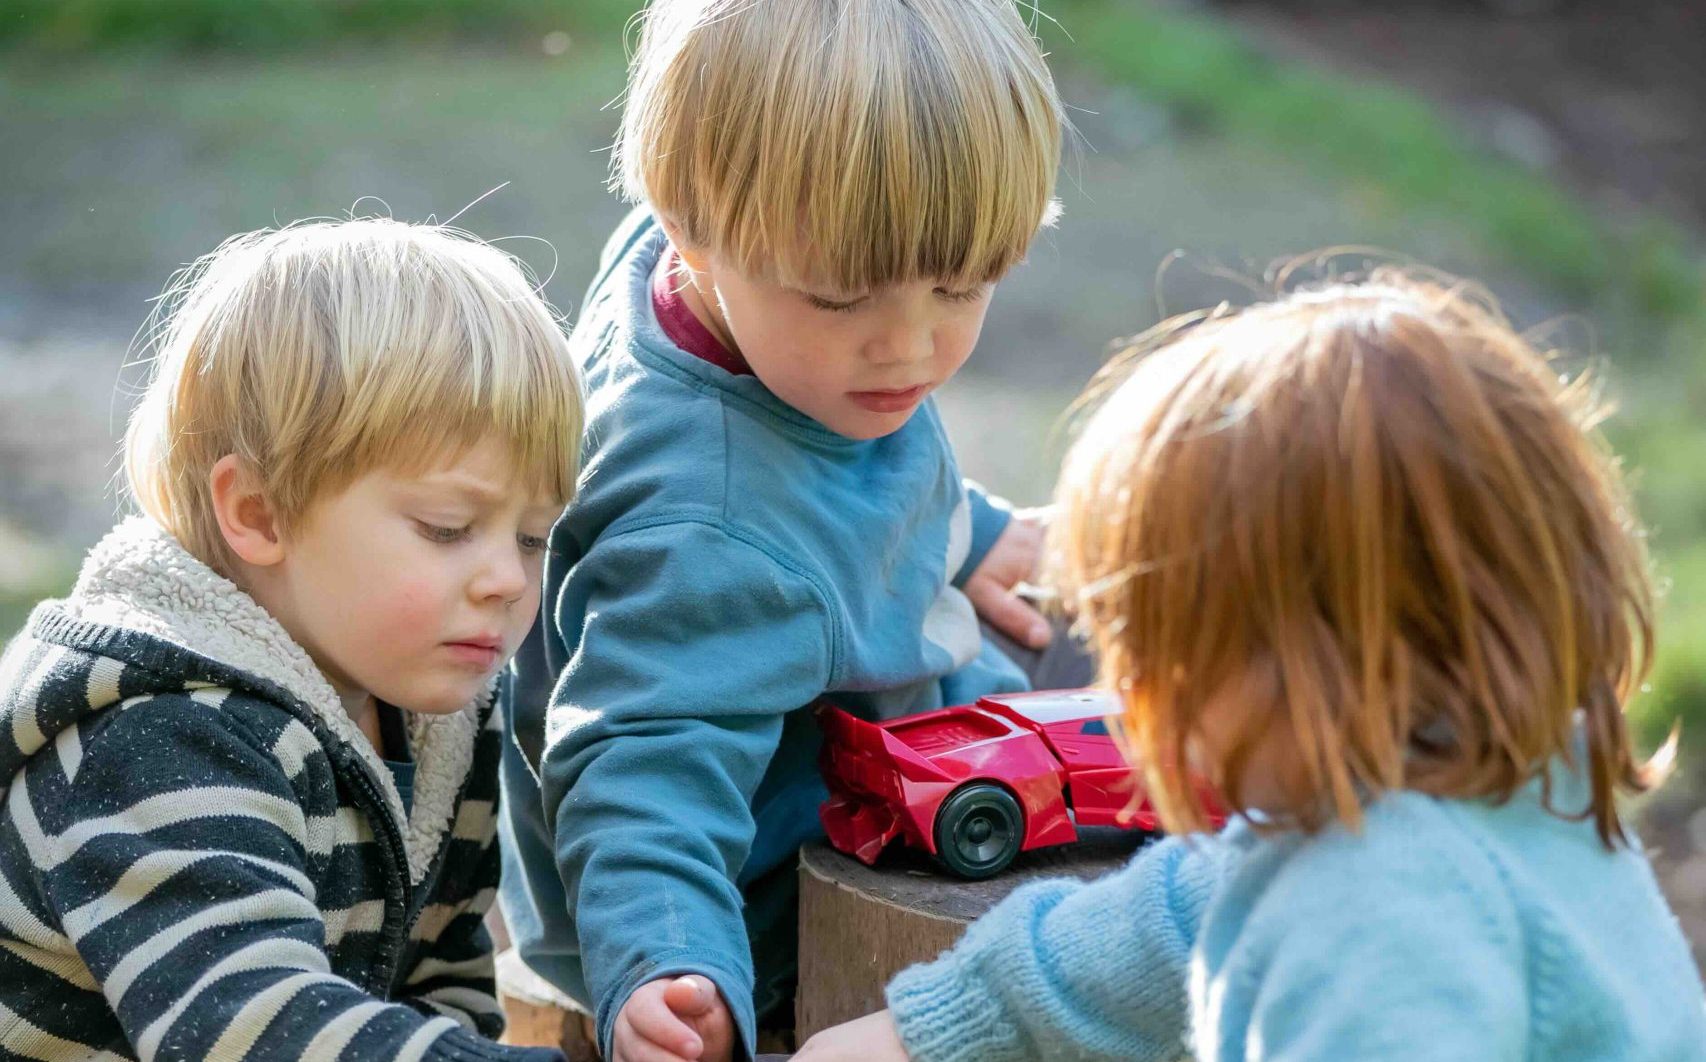 Outdoor play sessions for young children